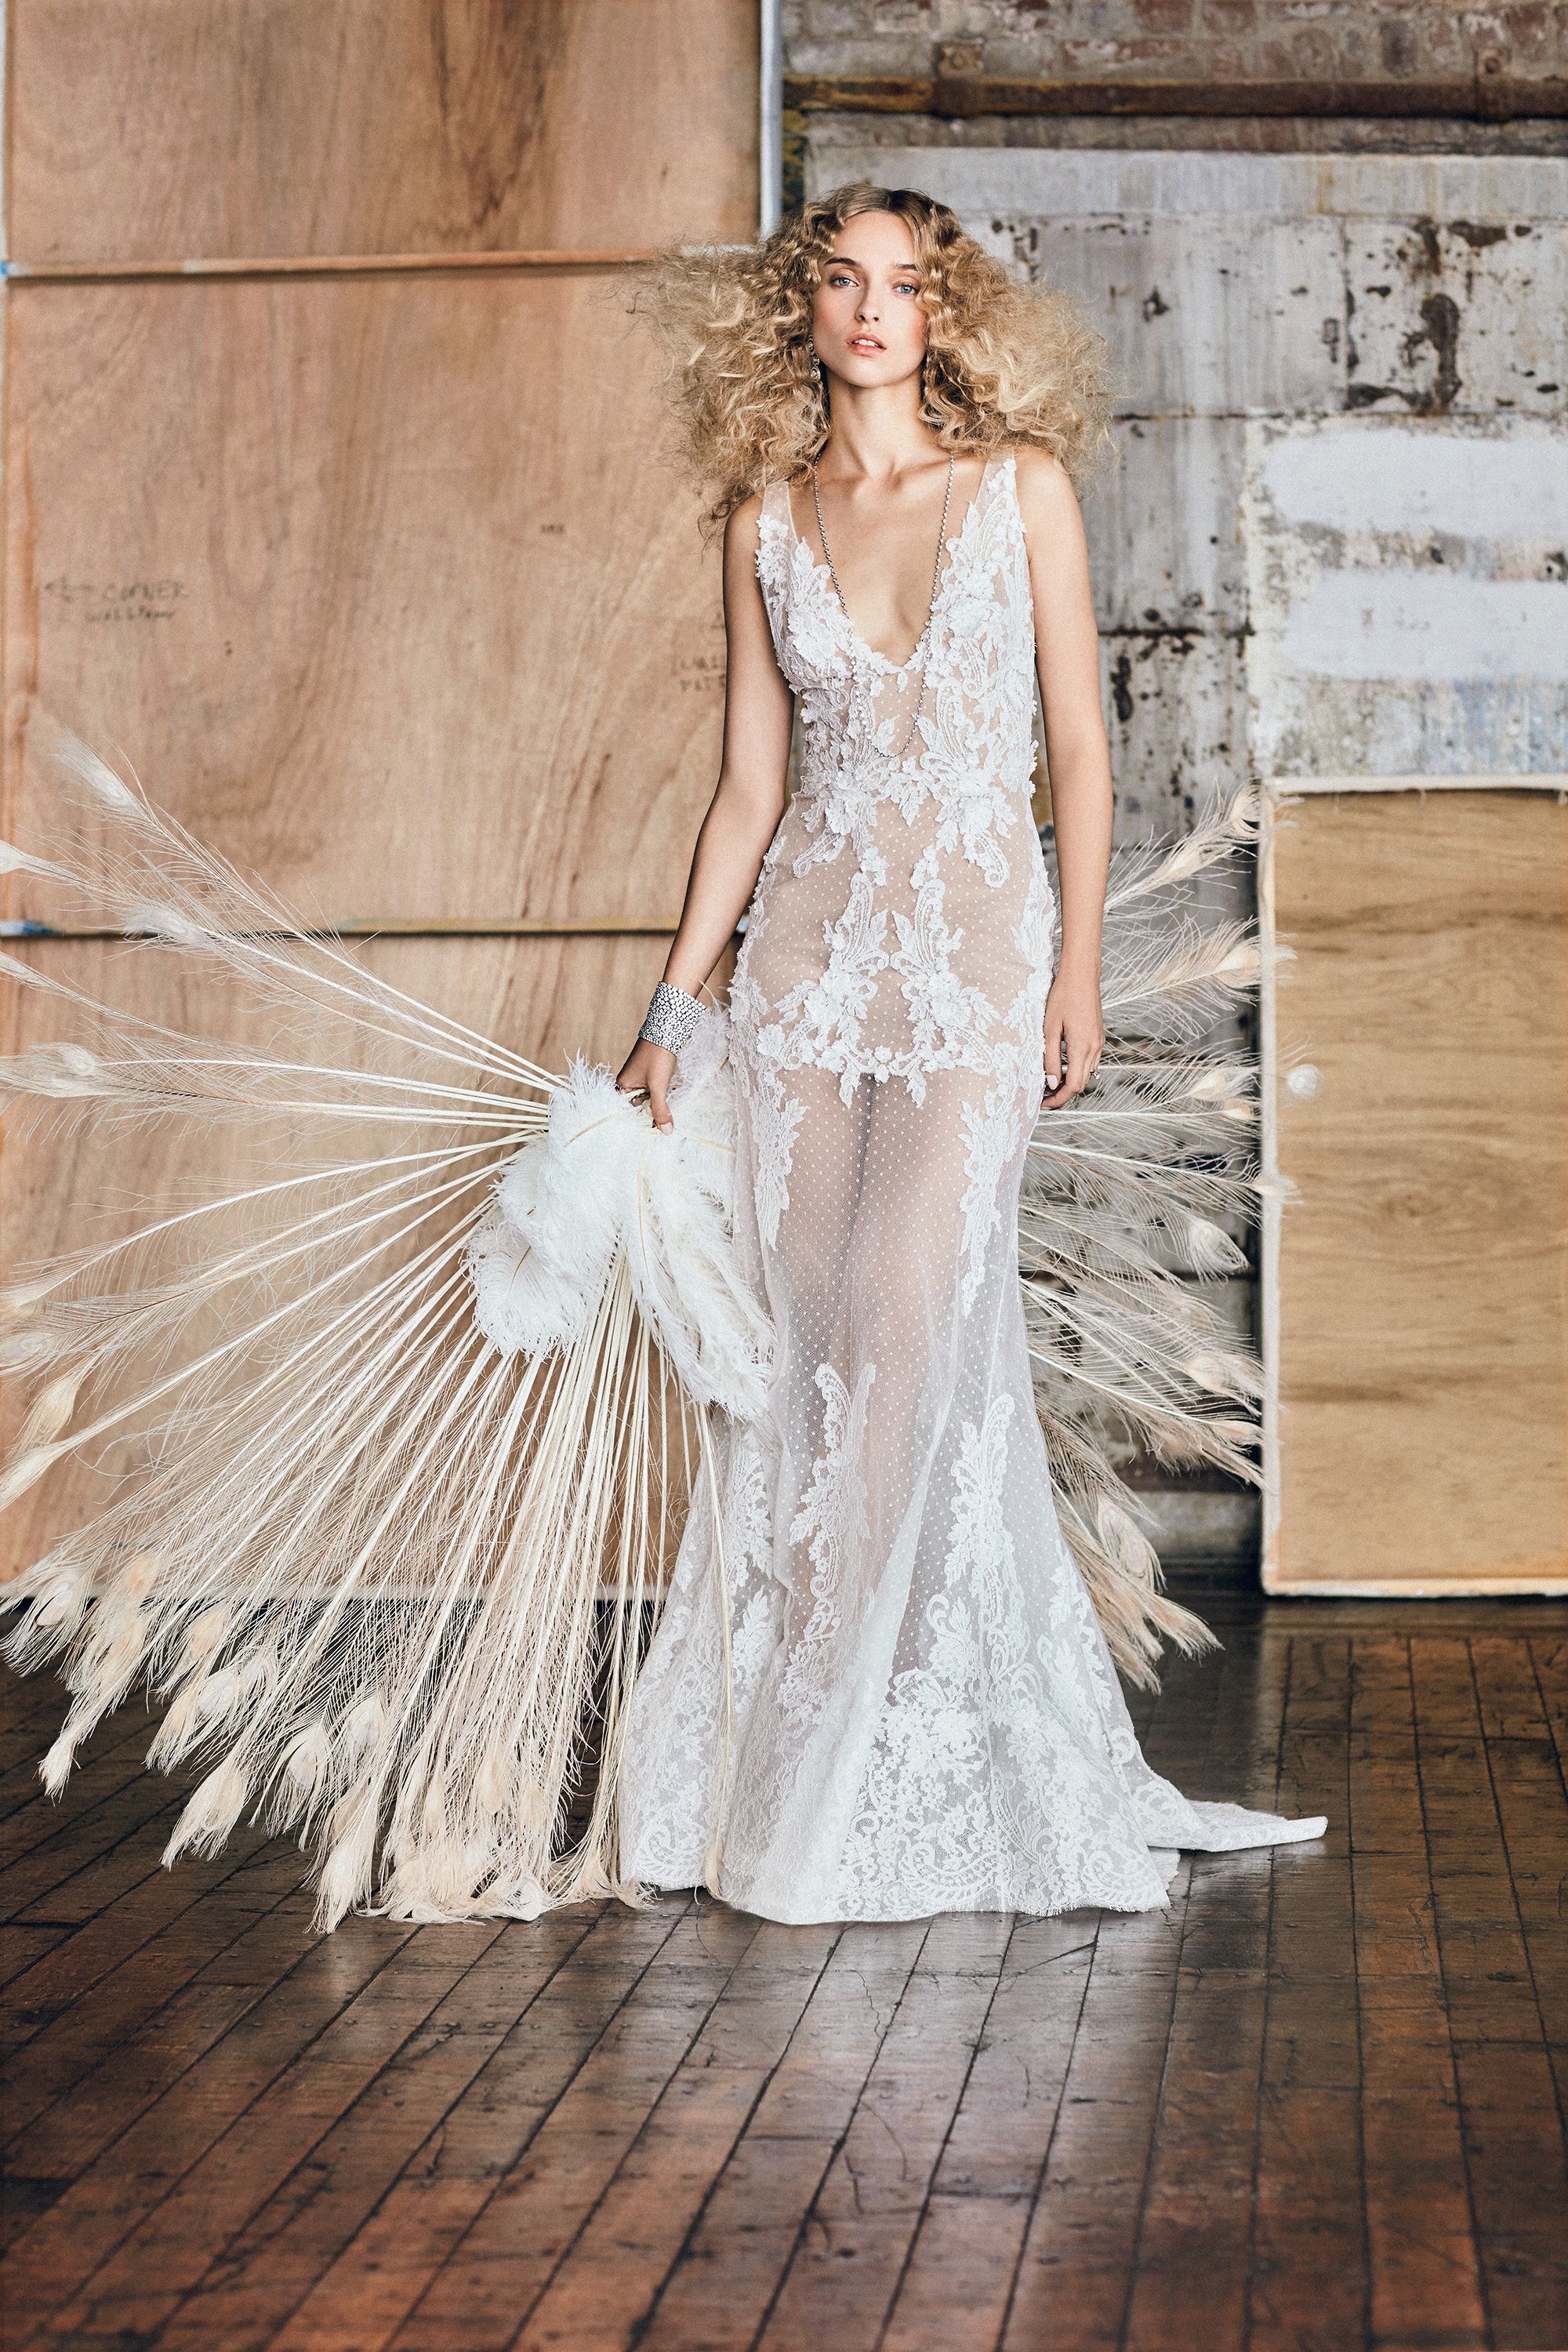 Looking For Vintage Wedding Dresses? Moda Operandi's New Offering Is a  Fashion Bride's Dream